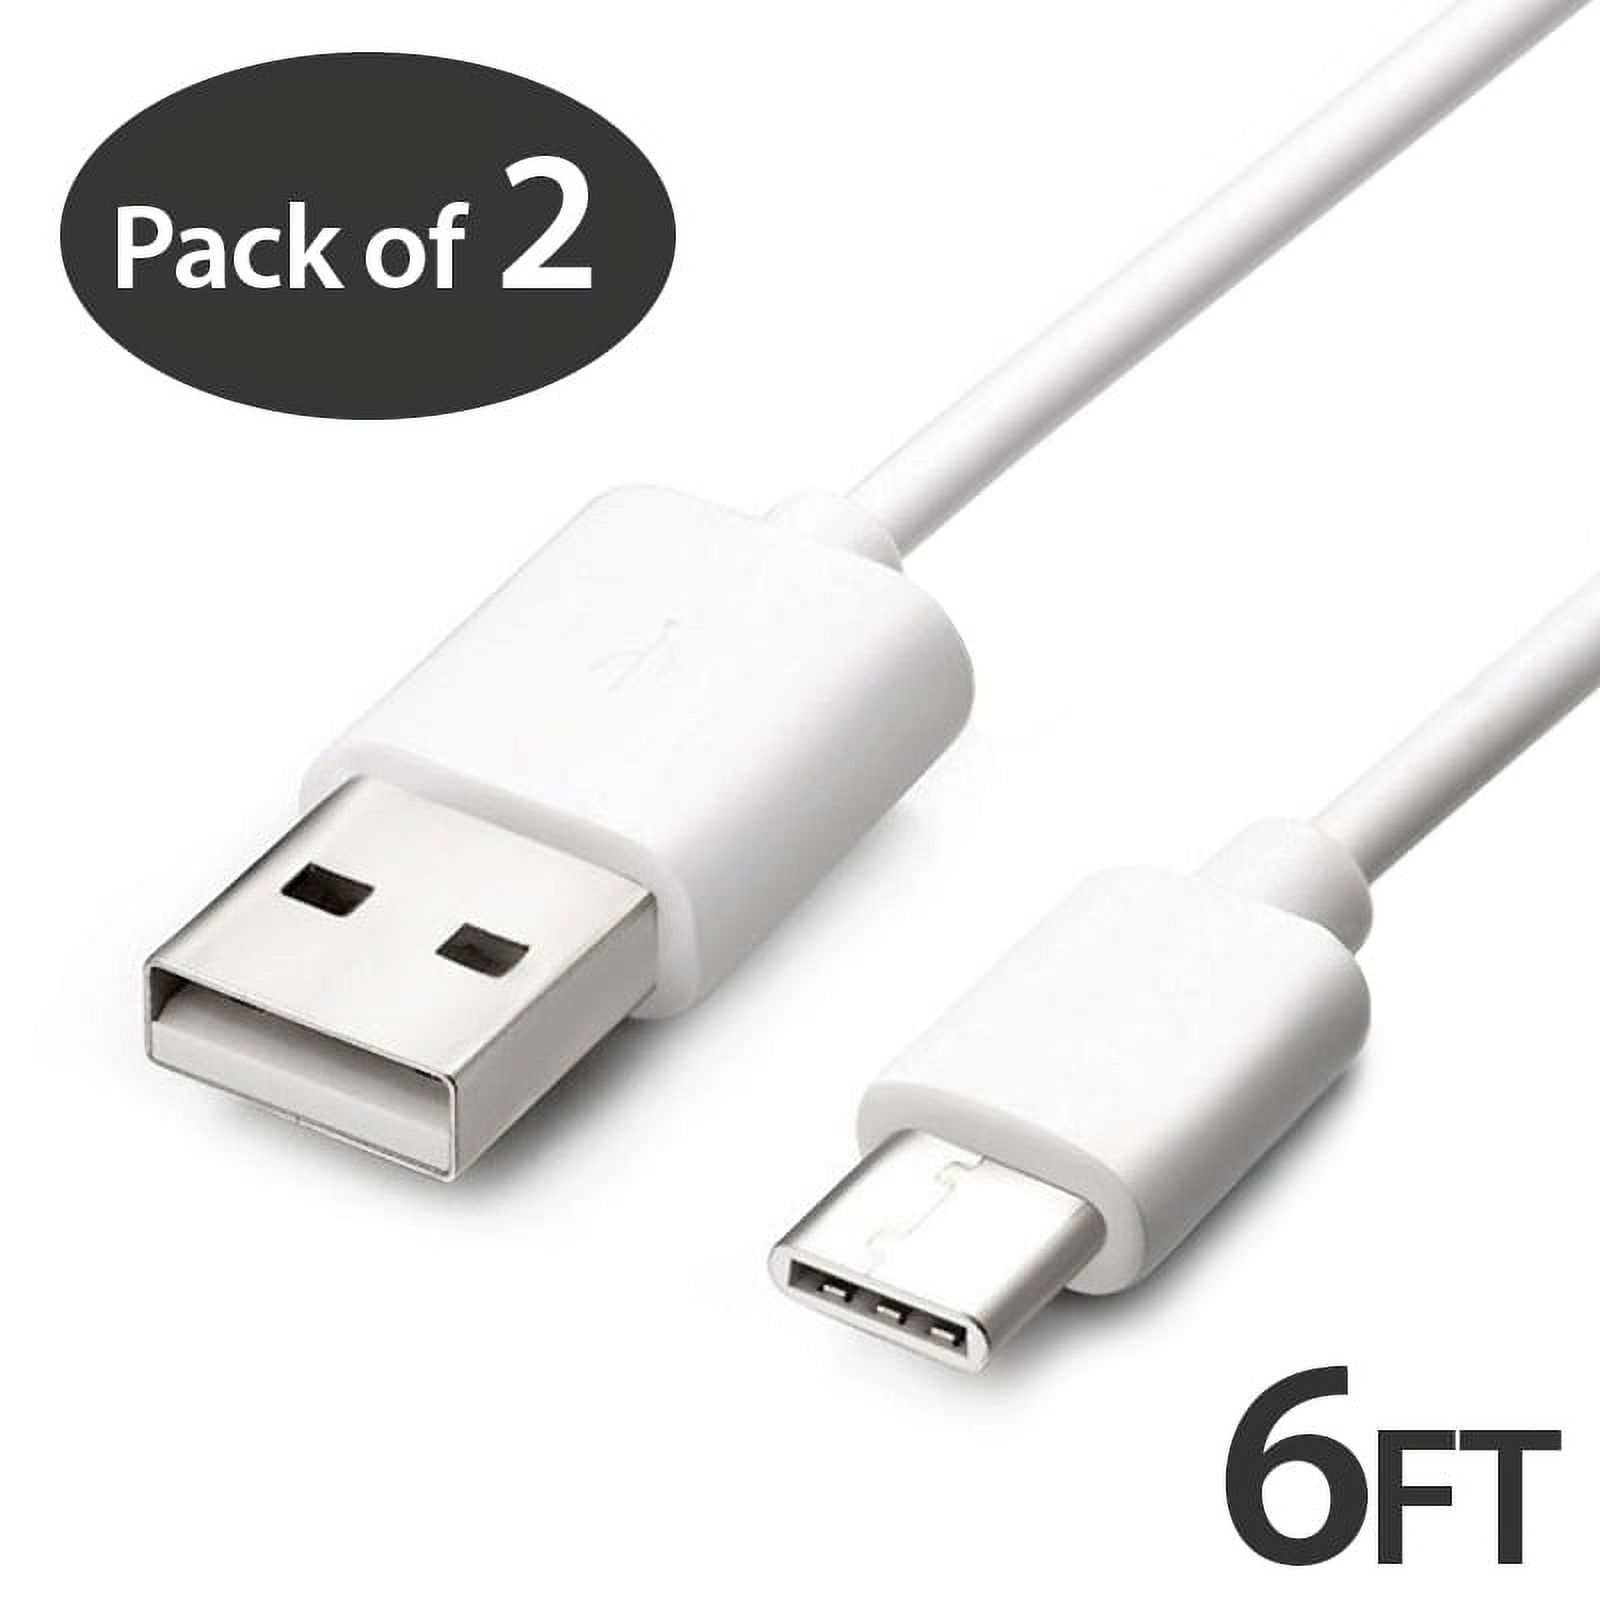 2x 6FT USB Type C Cable Fast Charging Cable USB-C Type-C 3.1 Data Sync Charger Cable Cord For Samsung Galaxy S9 S9+ Galaxy S8 S8 Plus Nexus 5X 6P OnePlus 2 3 LG G5 G6 V20 HTC M10 Google Pixel XL - image 1 of 7